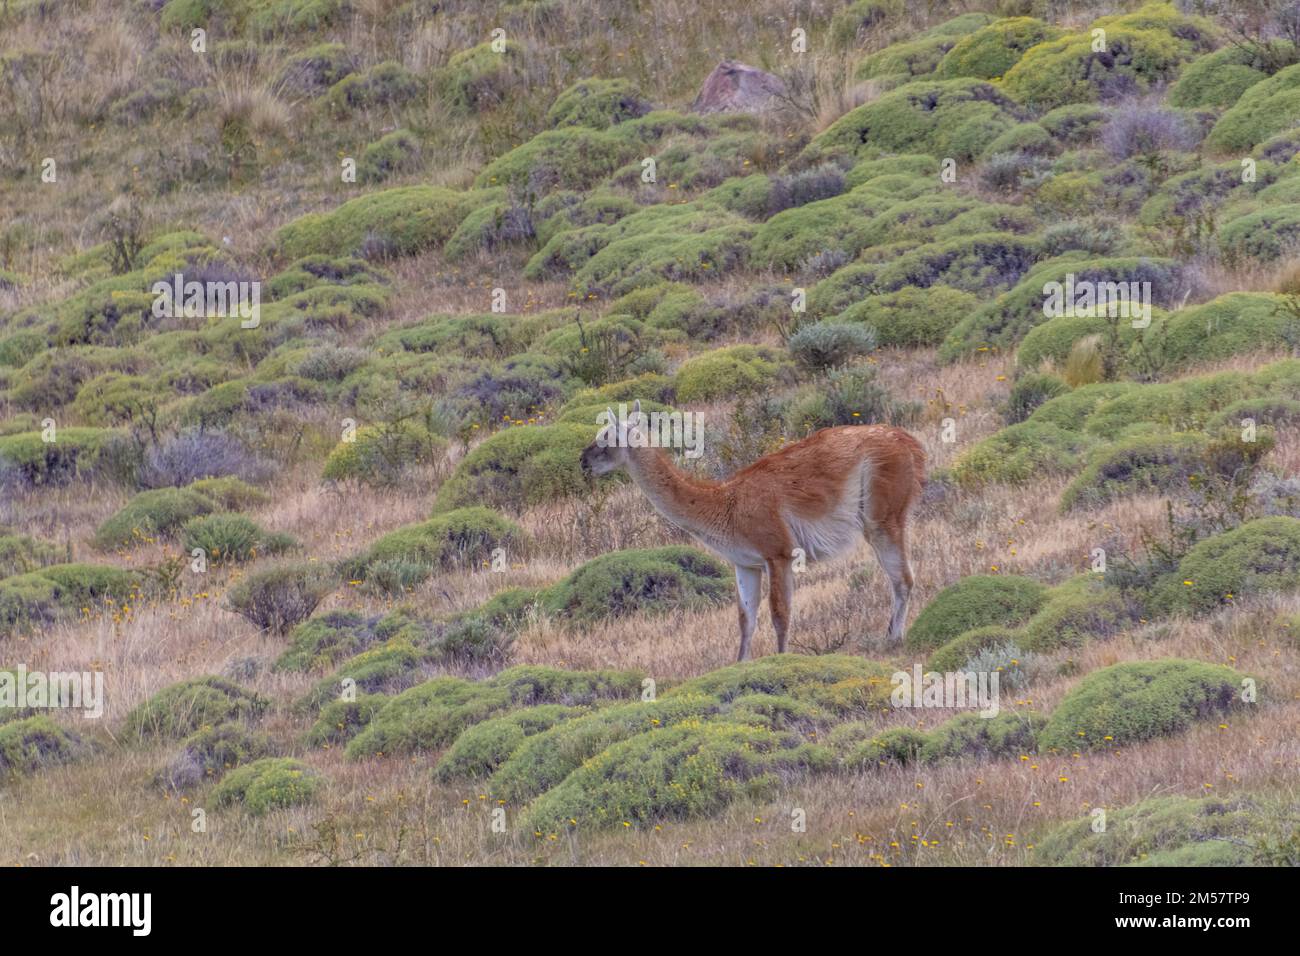 Vicugna or Guanicoe in the wild of Torres del Paine national park in Patagonia, Chile Stock Photo